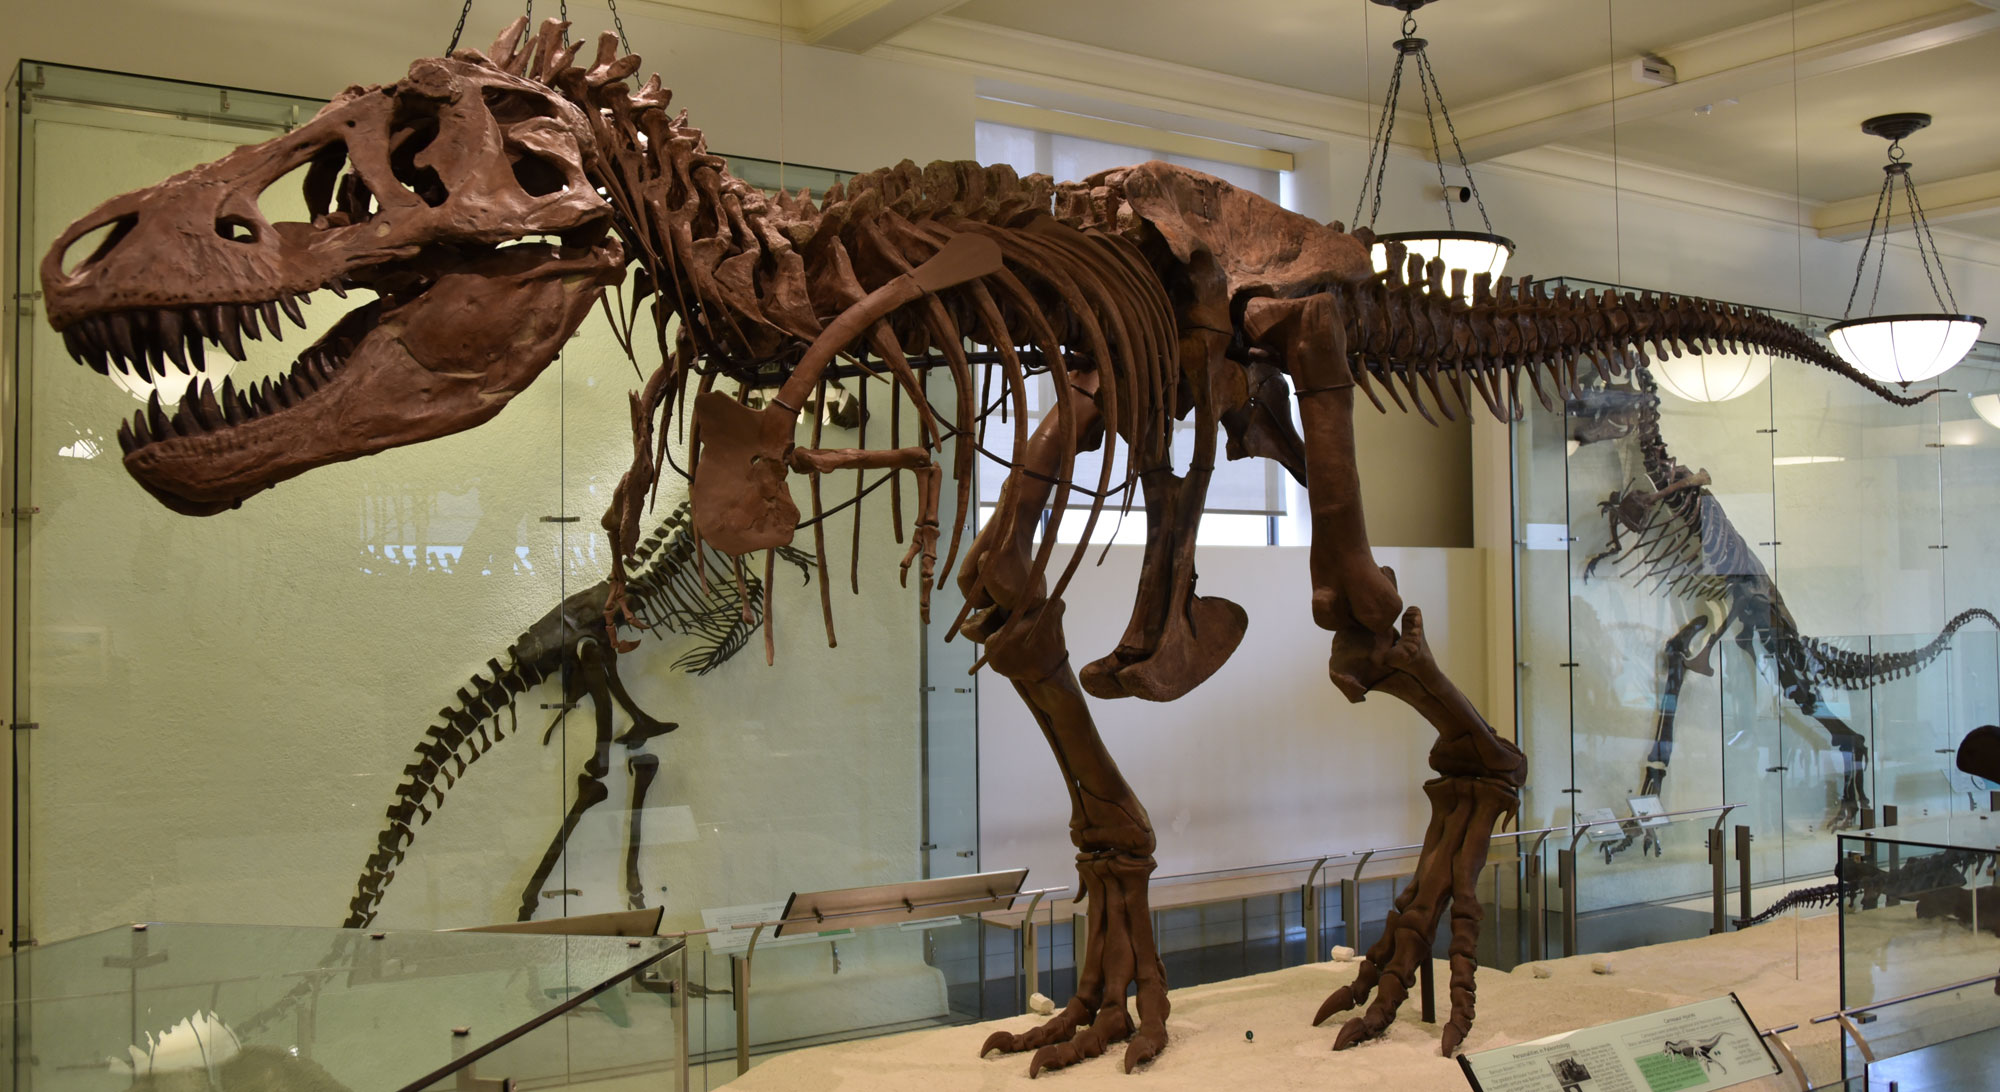 Photograph of a mounted Tyrannosaurus rex specimen on display at the American Museum of Natural History in New York City. Tyrannosaurus is a carnivorous dinosaur with a large skull and large, slightly curved, pointed teeth; it is bipedal, with powerful hind legs and relatively puny arms. The tail is long and held up off the ground. The photo is taken from the front-side, showing such of the skeleton, with the skull especially prominent. The skeleton is mounted in a walking position.